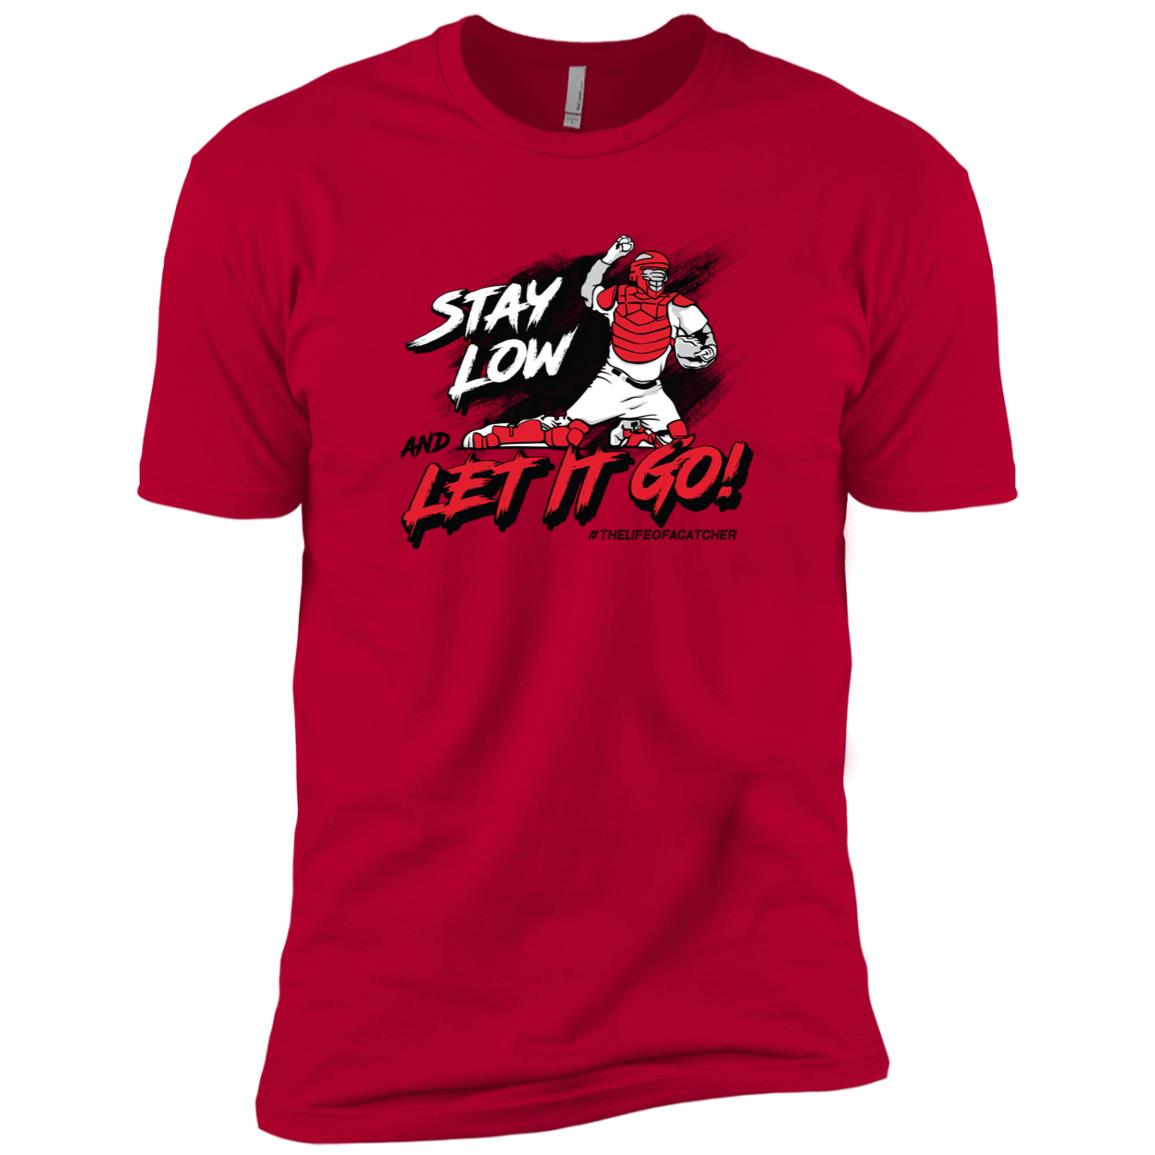 Stay Low & Let It Go Youth Short Sleeve Tee - Red